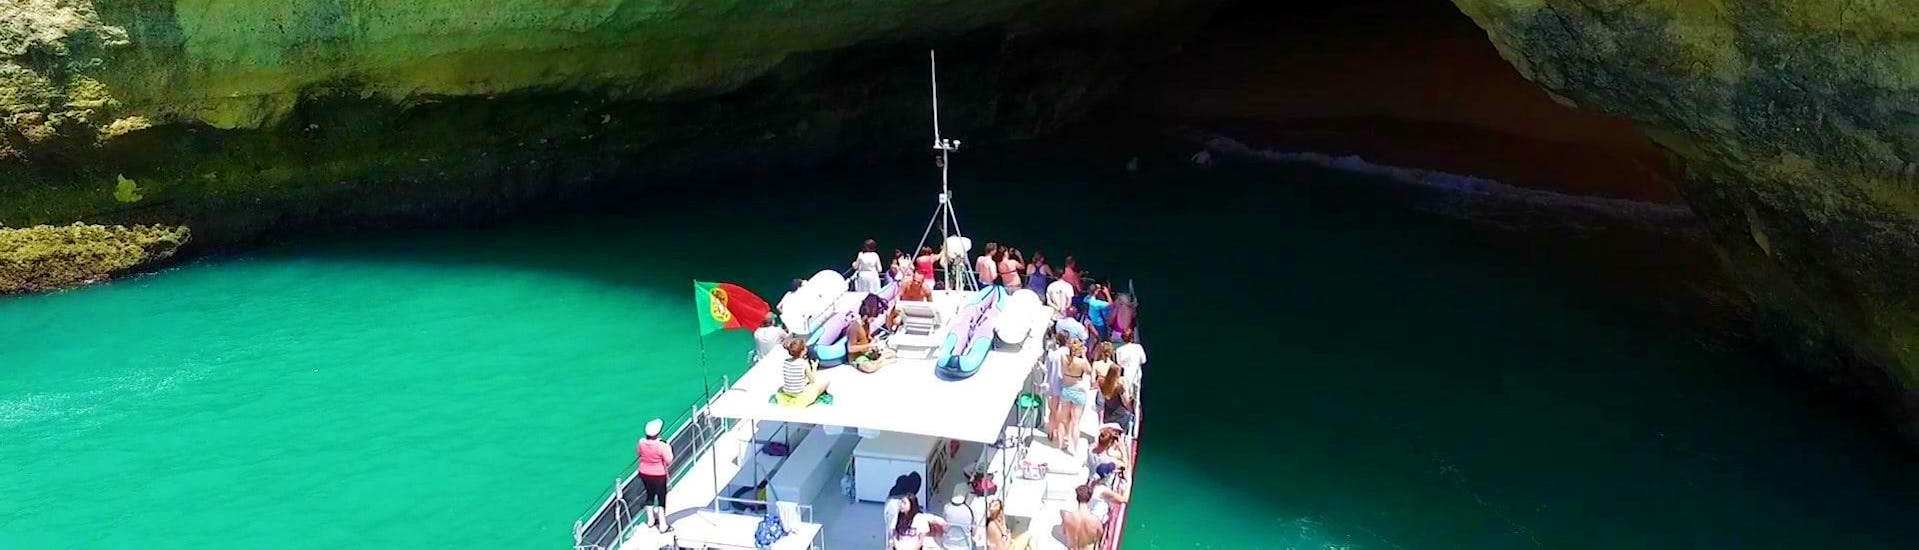 Boat trip from Vilamoura to the Benagil Caves with Barbecue from Cruzeiros da Oura Vilamoura.